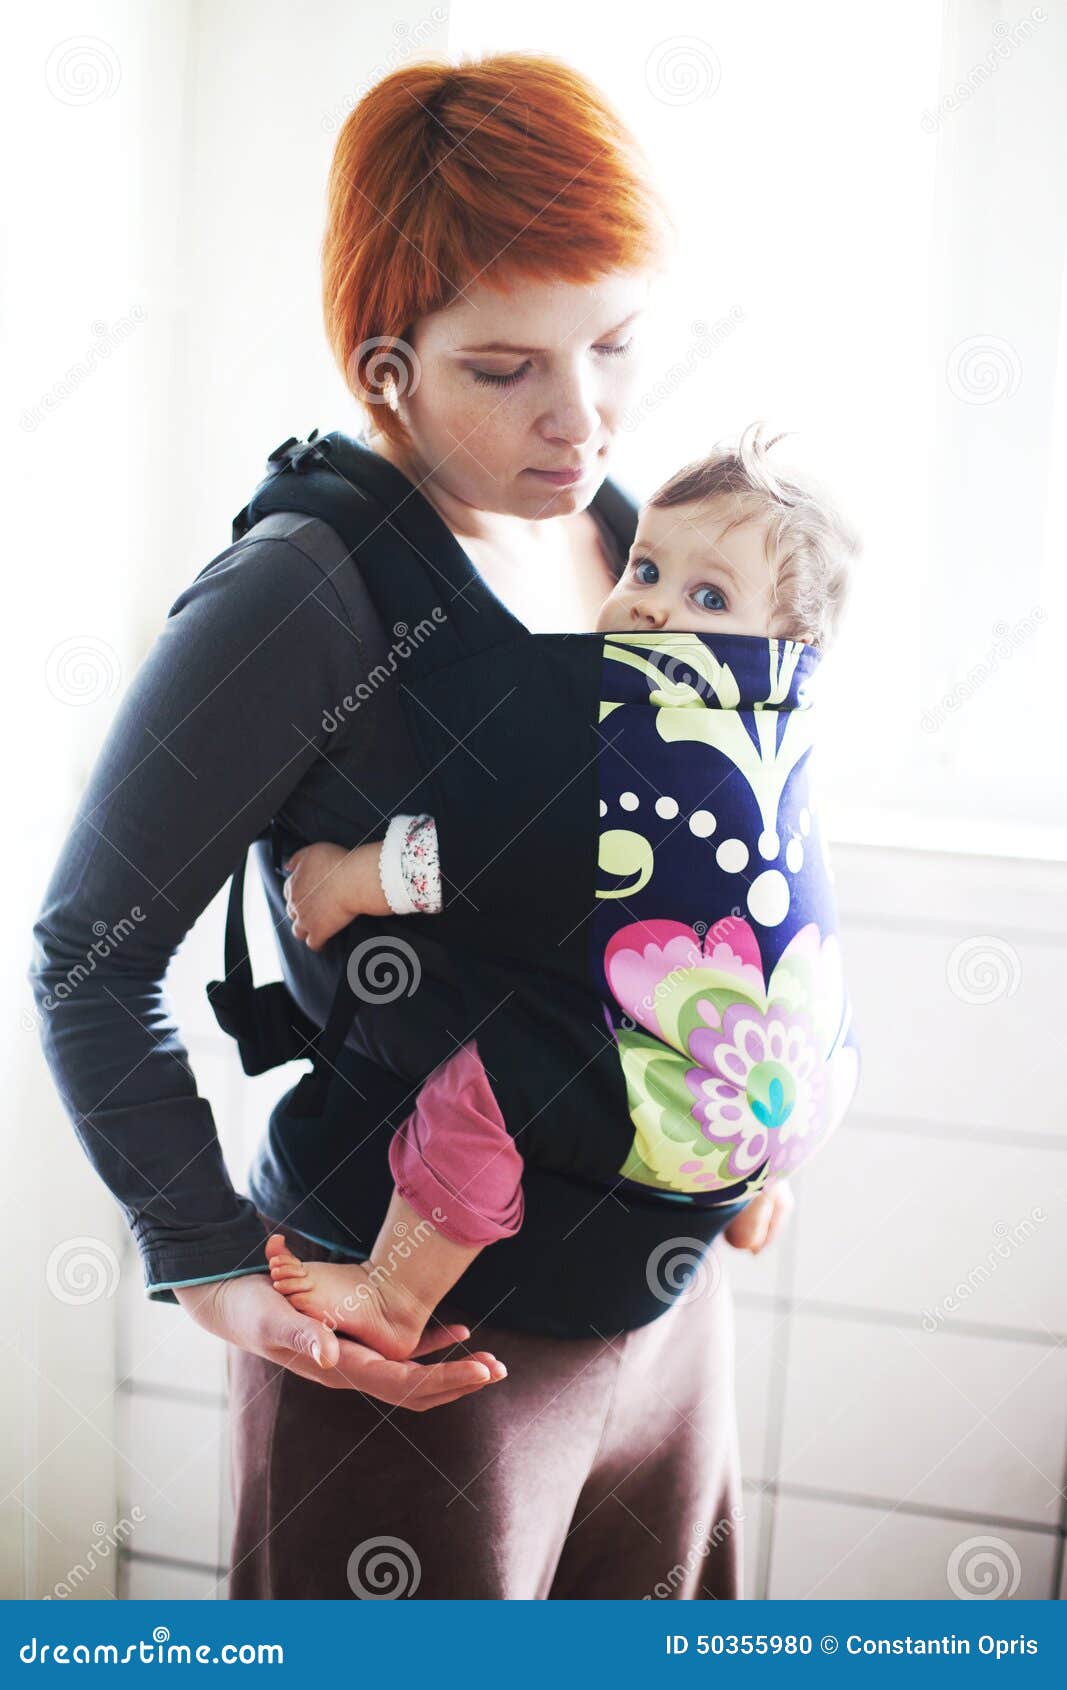 baby held by his mother in a baby carrier